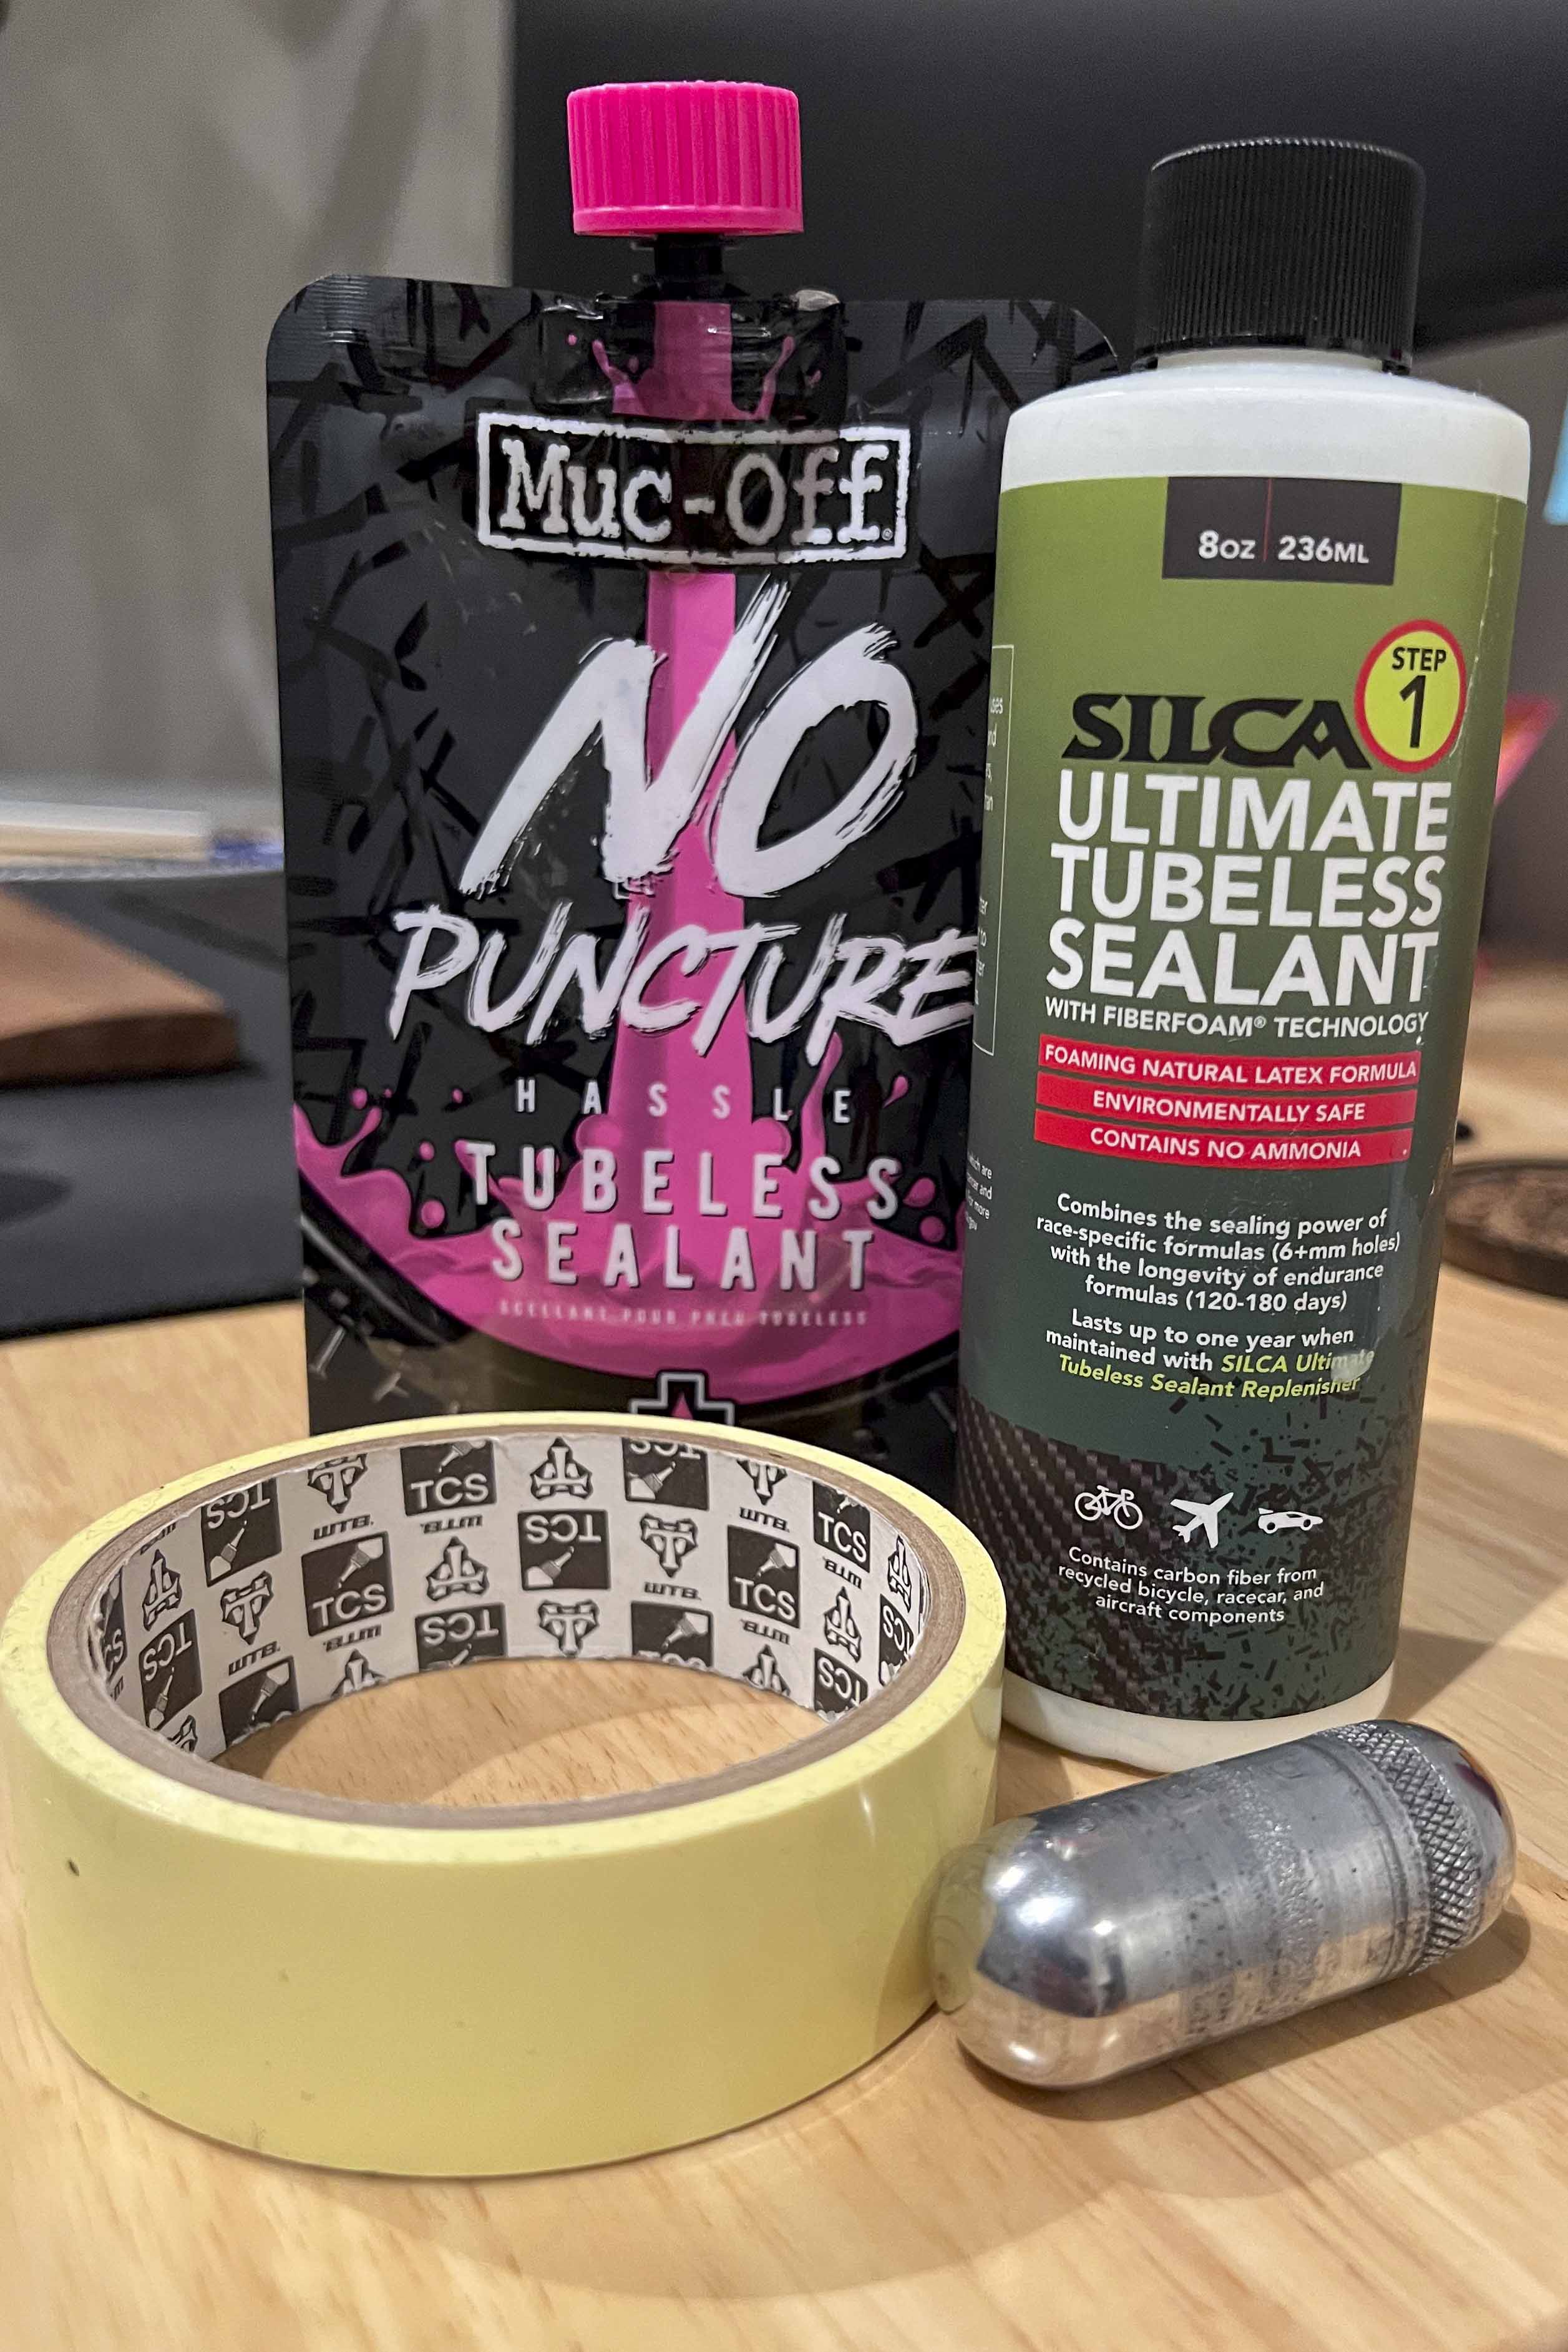 Featured bicycle tire tubeless products on a desk, including Silca, MucOff, rim tape, and a Dynaplug pill canister.